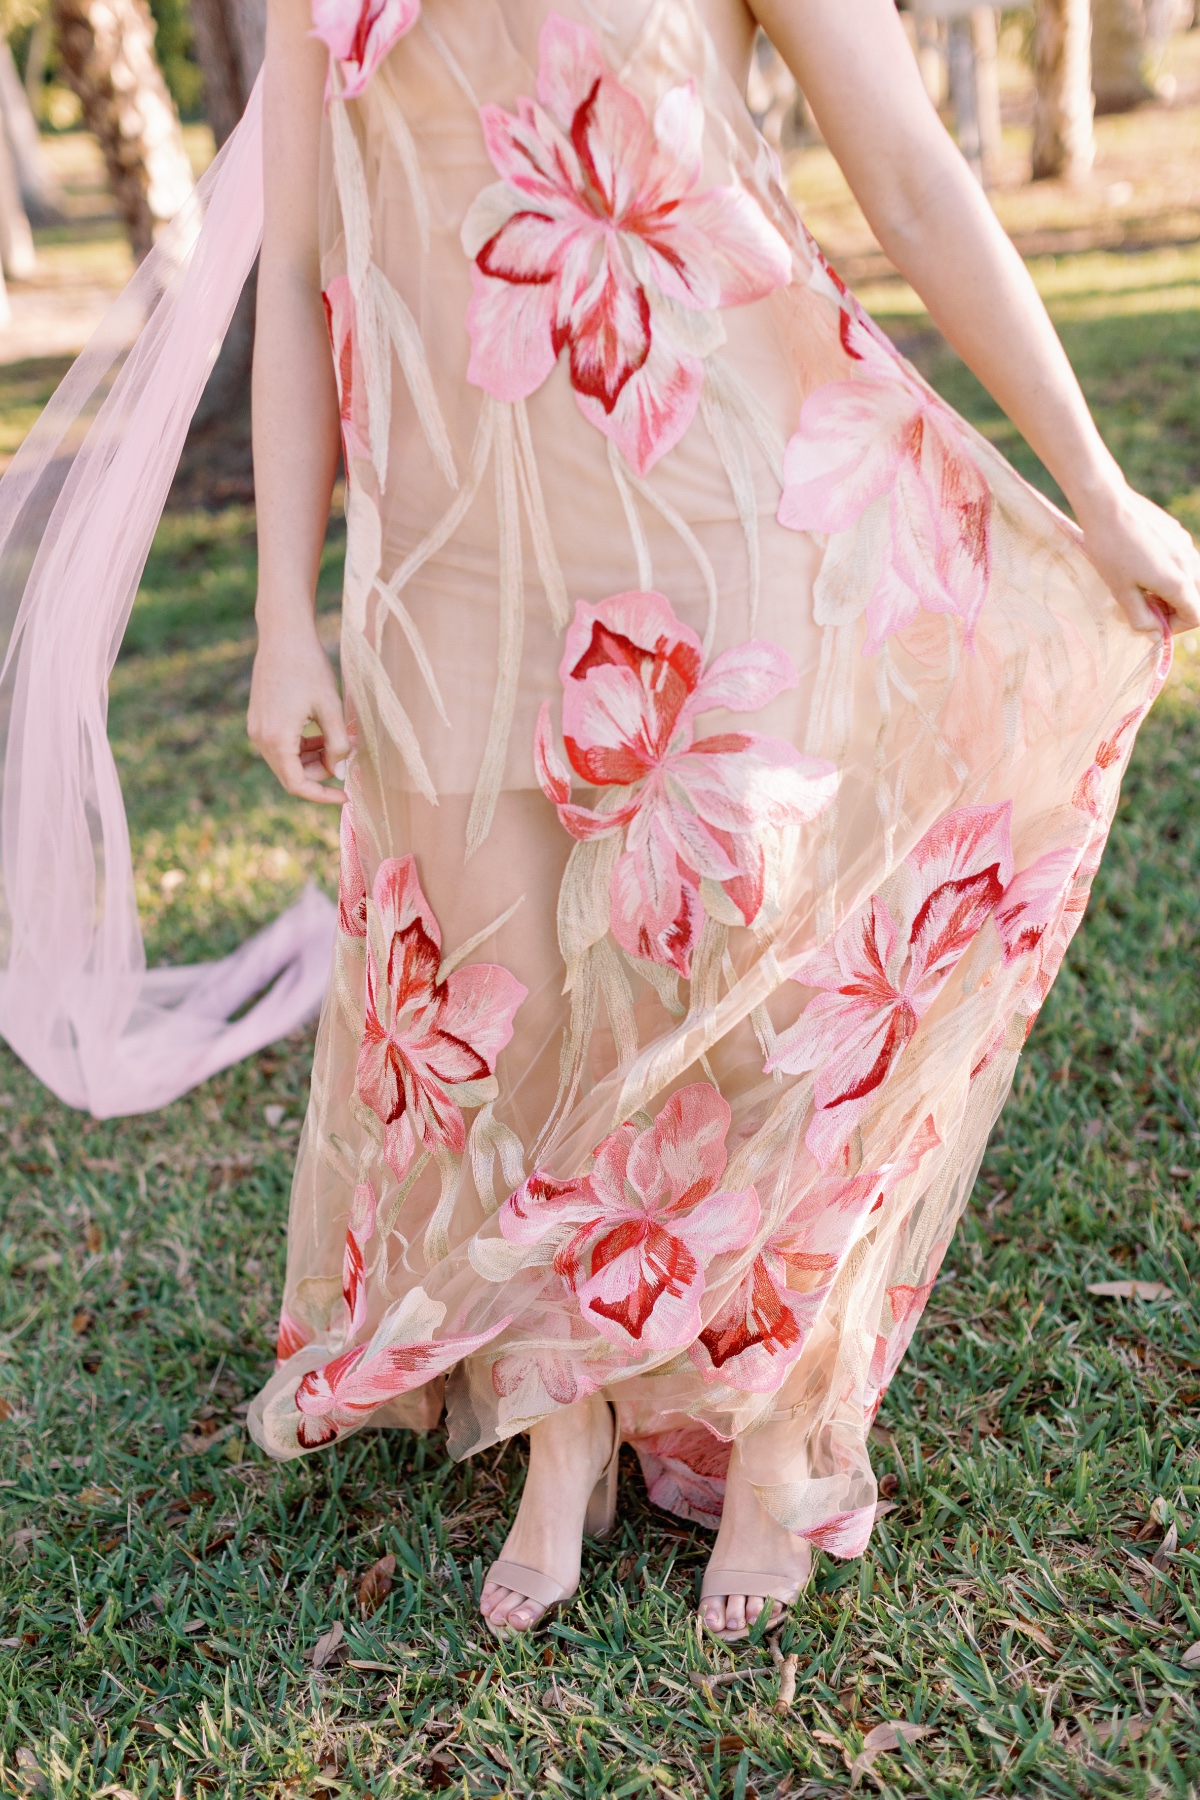 Pastel pink and red floral bridesmaid dresses with tulle